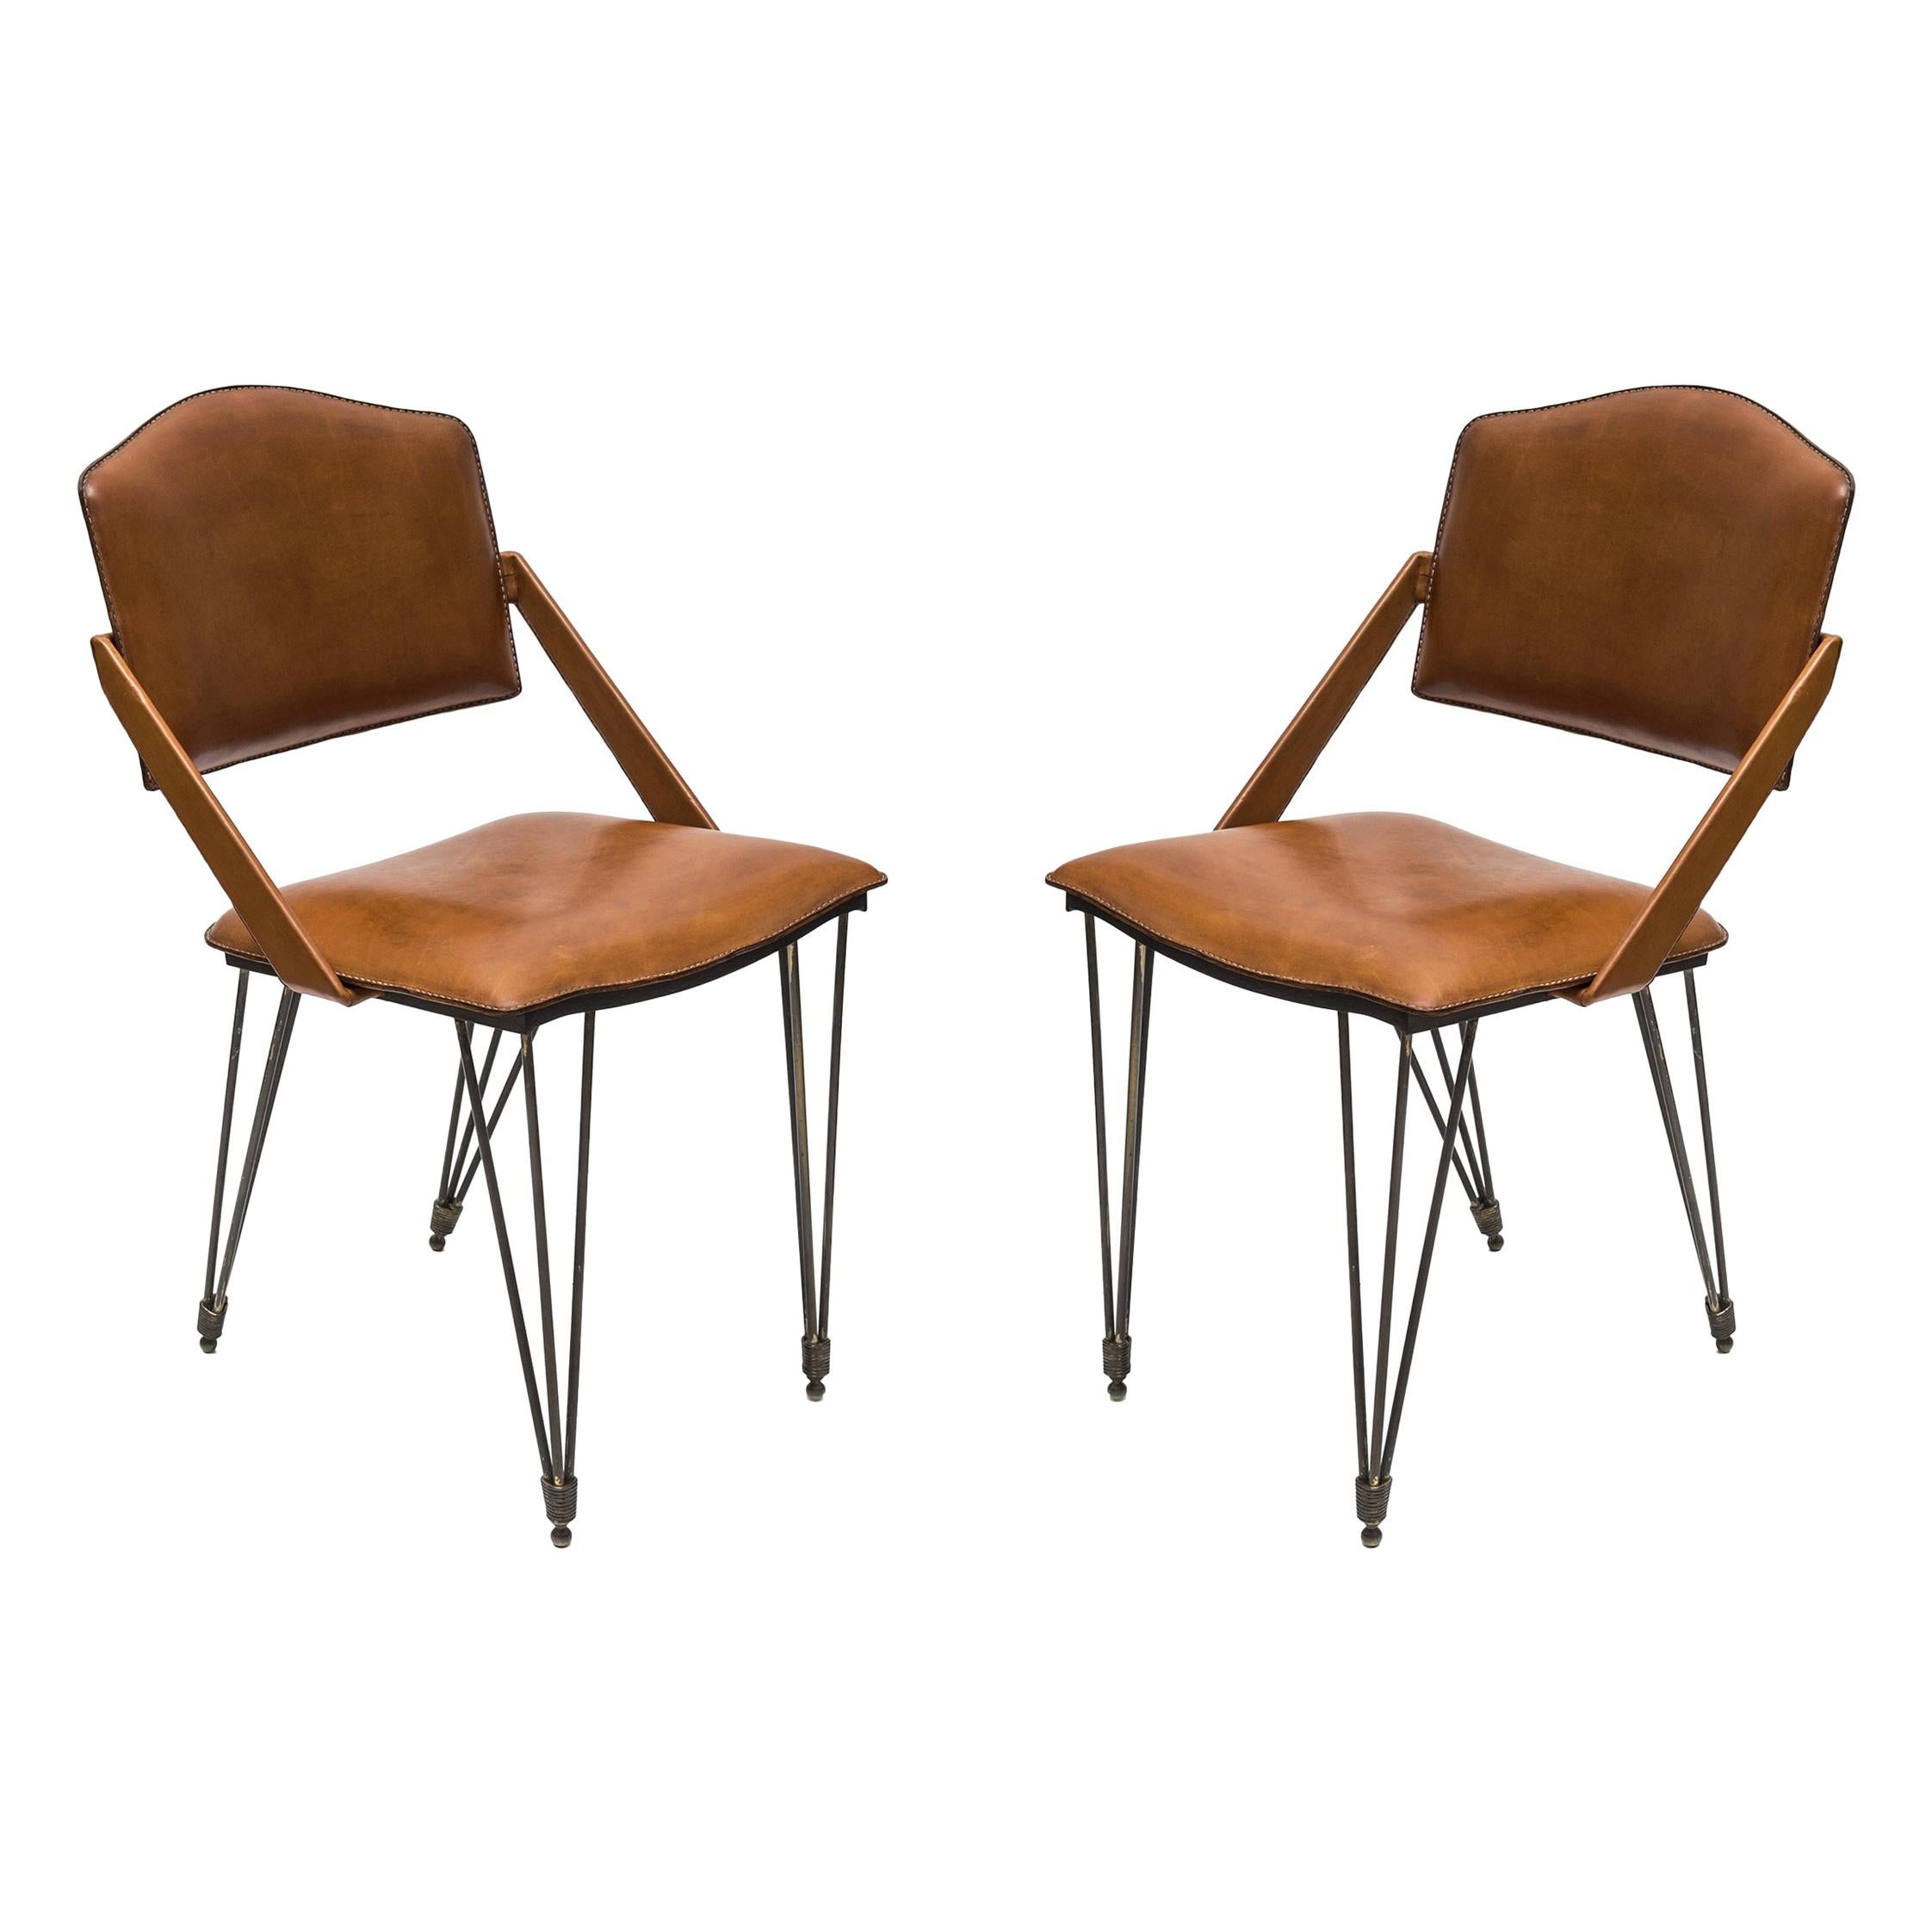 Pair of Stitched Leather Armchairs by Jacques Adnet